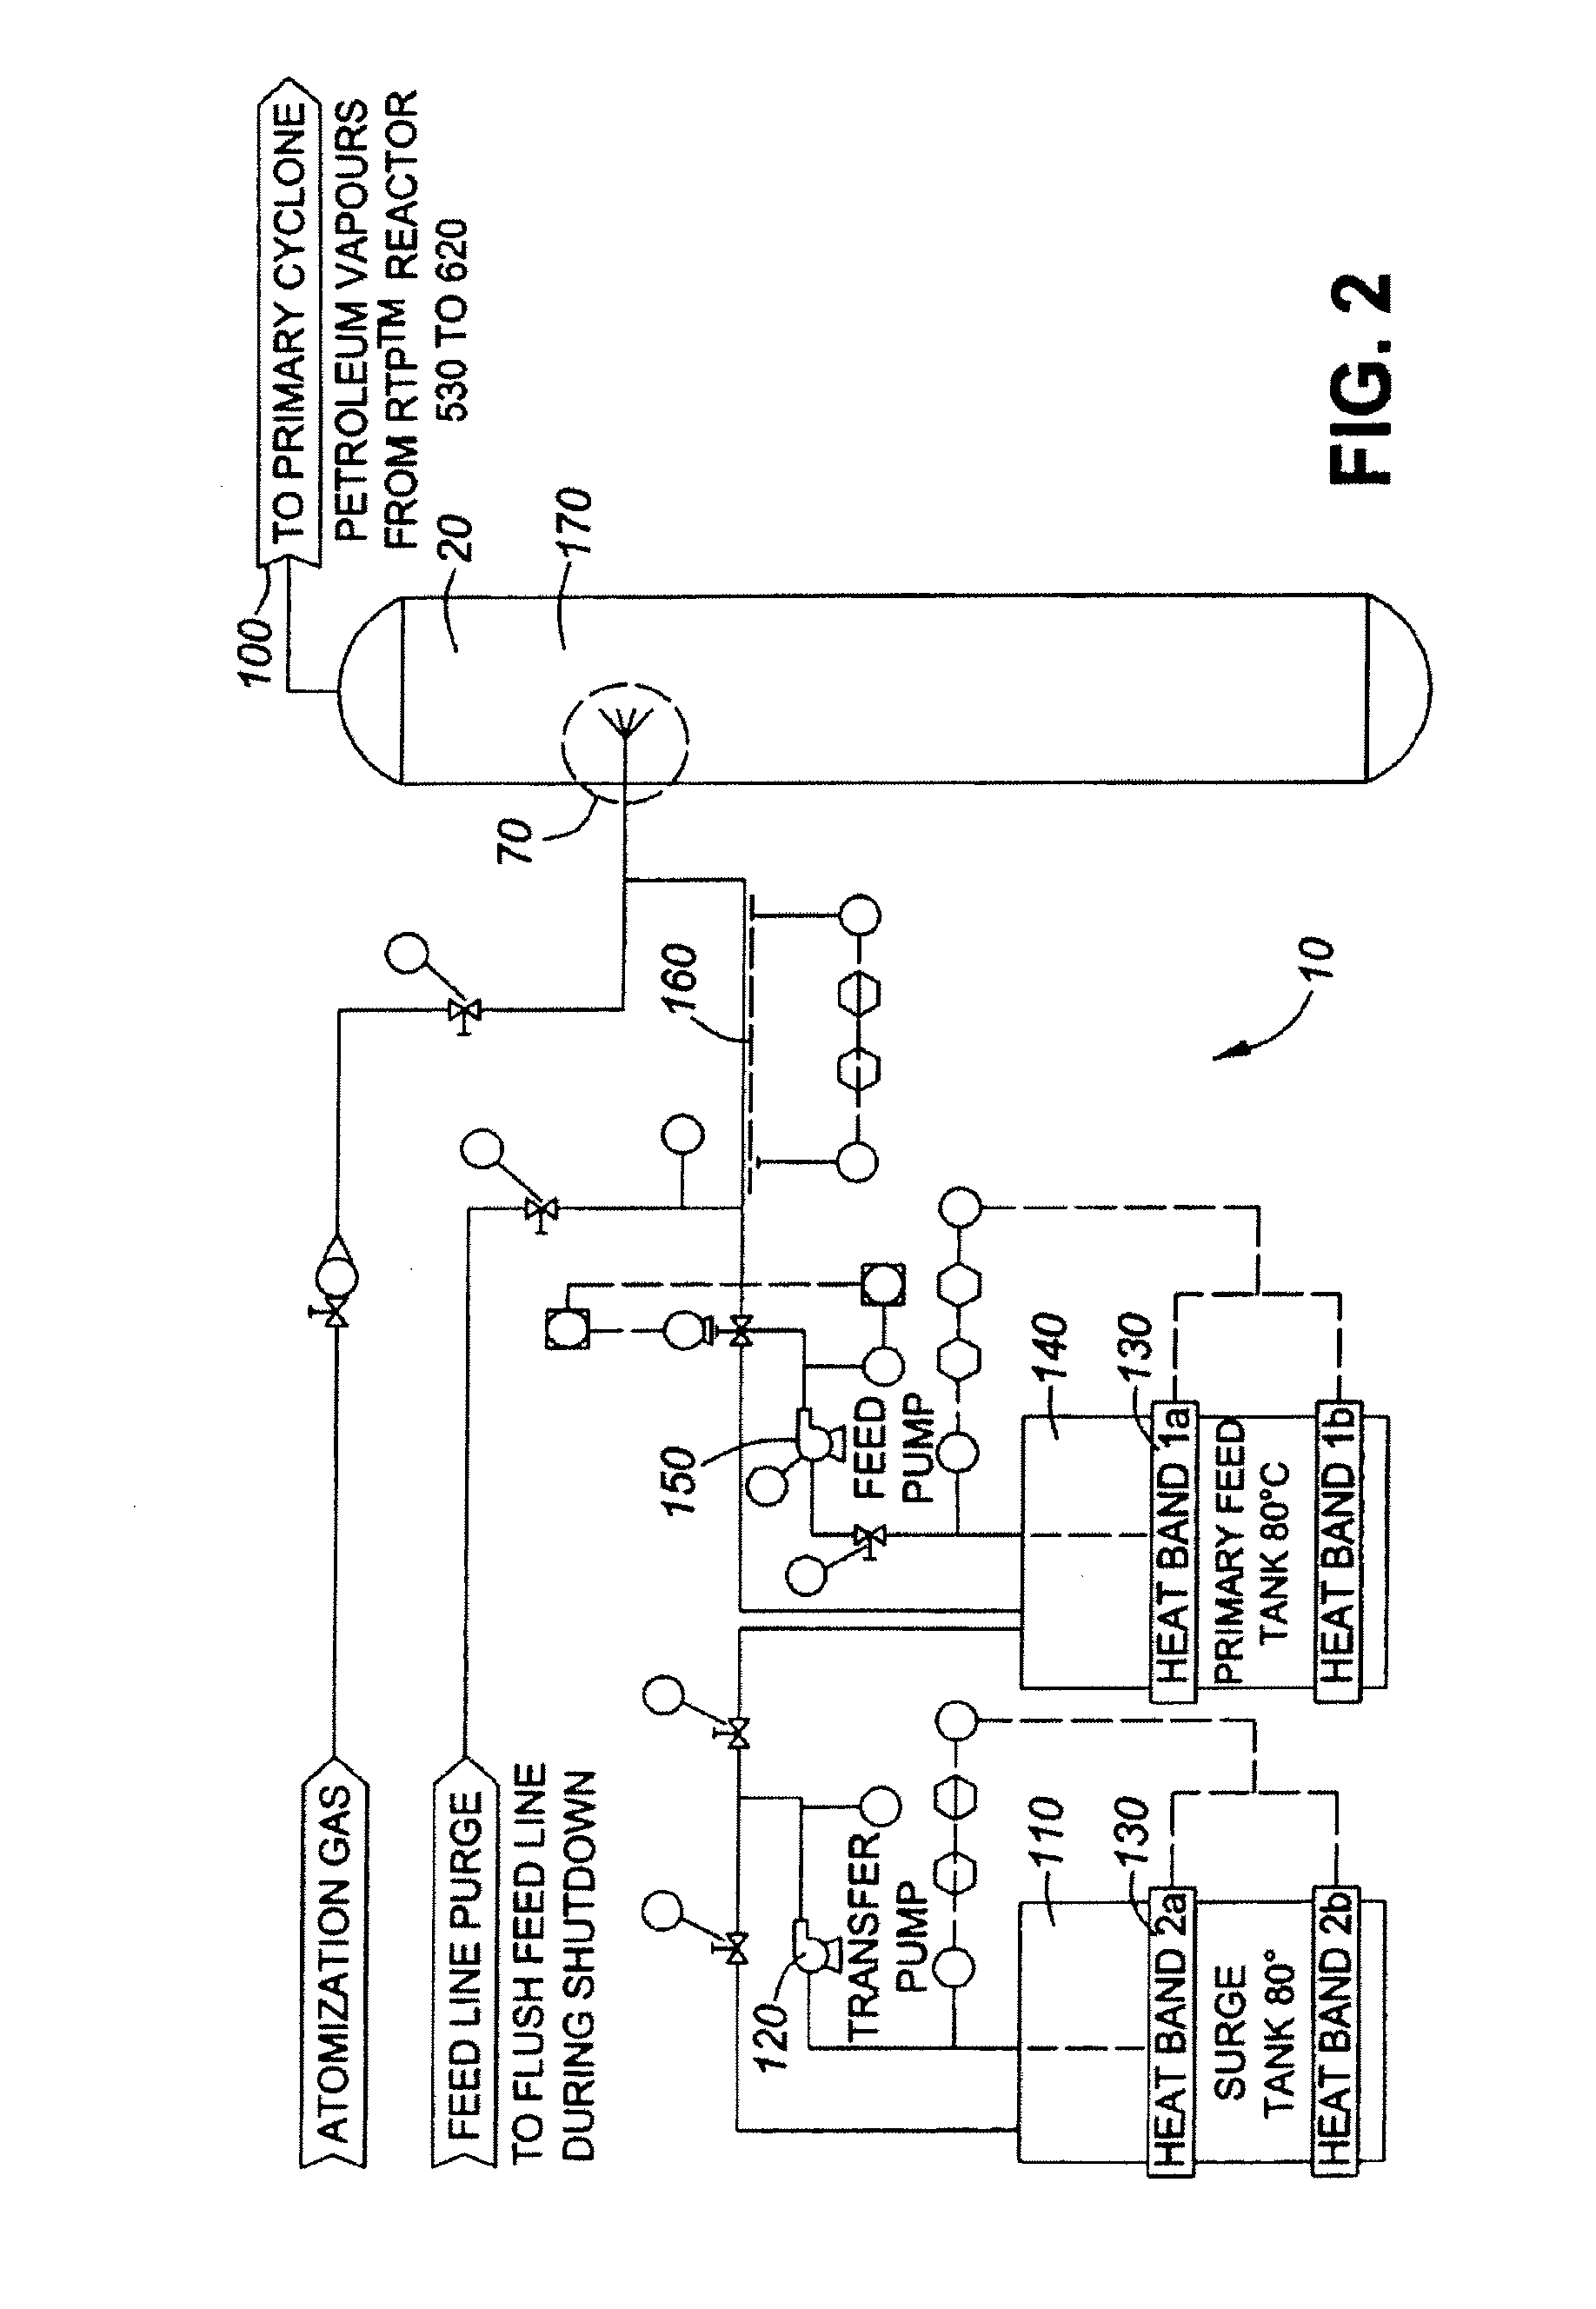 Methods and Systems for Producing Reduced Resid and Bottomless Products from Heavy Hydrocarbon Feedstocks